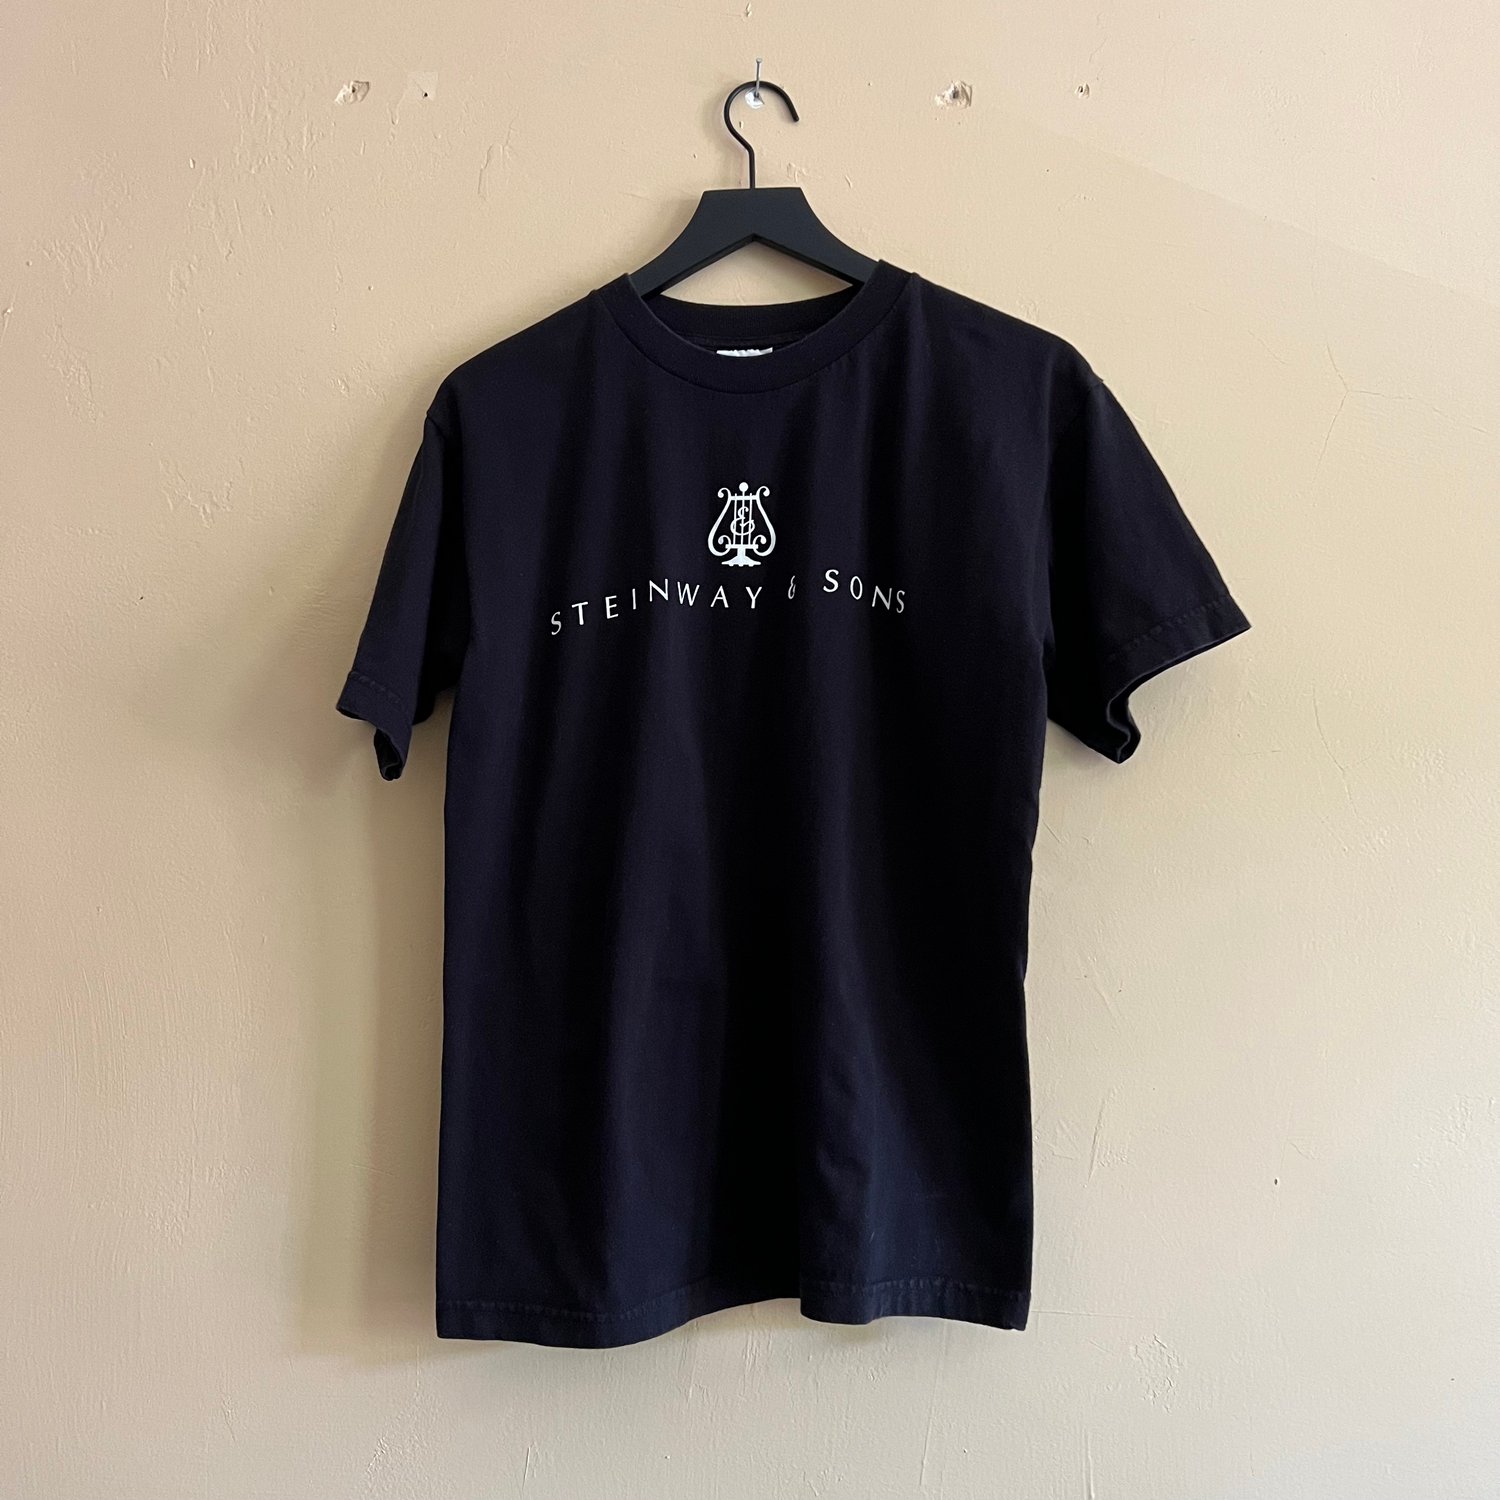 Image of Steinway & Sons Promo T-Shirt